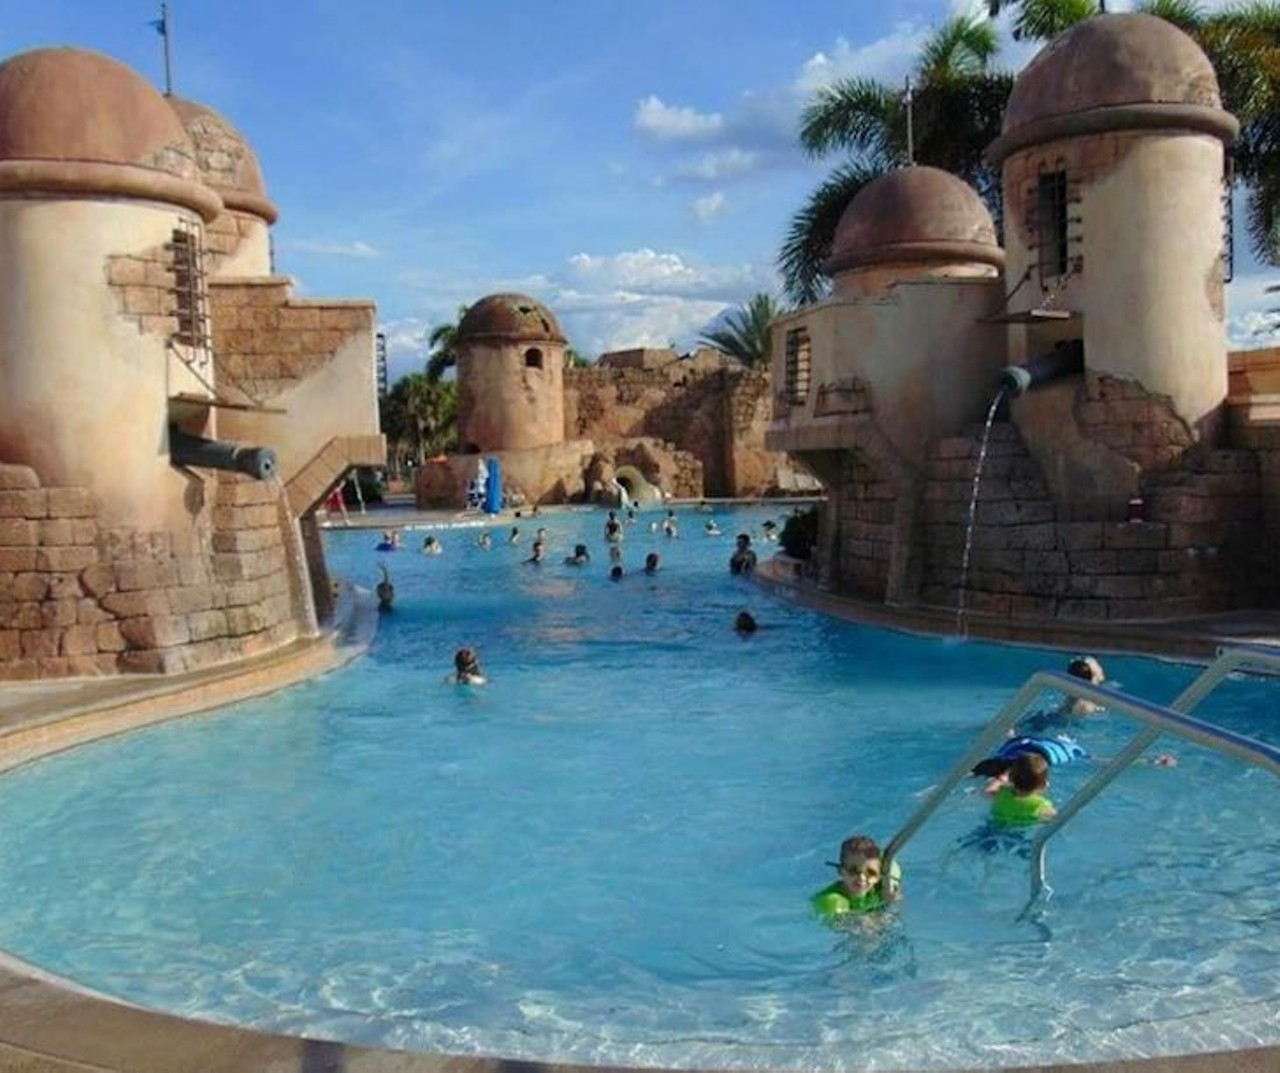 Disney&#146;s Caribbean Beach Resort 
900 Cayman Way, Lake Buena Vista | 407-934-3400 | 9 a.m. - 10 p.m.
Take a mini vacation and visit Disney&#146;s Caribbean Beach Resort to travel down an 82-foot-long slide into a zero-entry pool. There are two slides and water cannons to make the experience fun and enjoyable. A shipwreck play area with three small slides is also available for kids nearby. Only guests staying at the resort are allowed to use the pool, and additional visitors are not allowed to join. This resort is also undergoing refurbishments until further notice, but the only operations it affects are Old Port Royale Food Court, Shutters at Old Port Royale, Banana Cabana Pool Bar and Calypso Trading Post.
Photo via therubyredrebel/Instagram